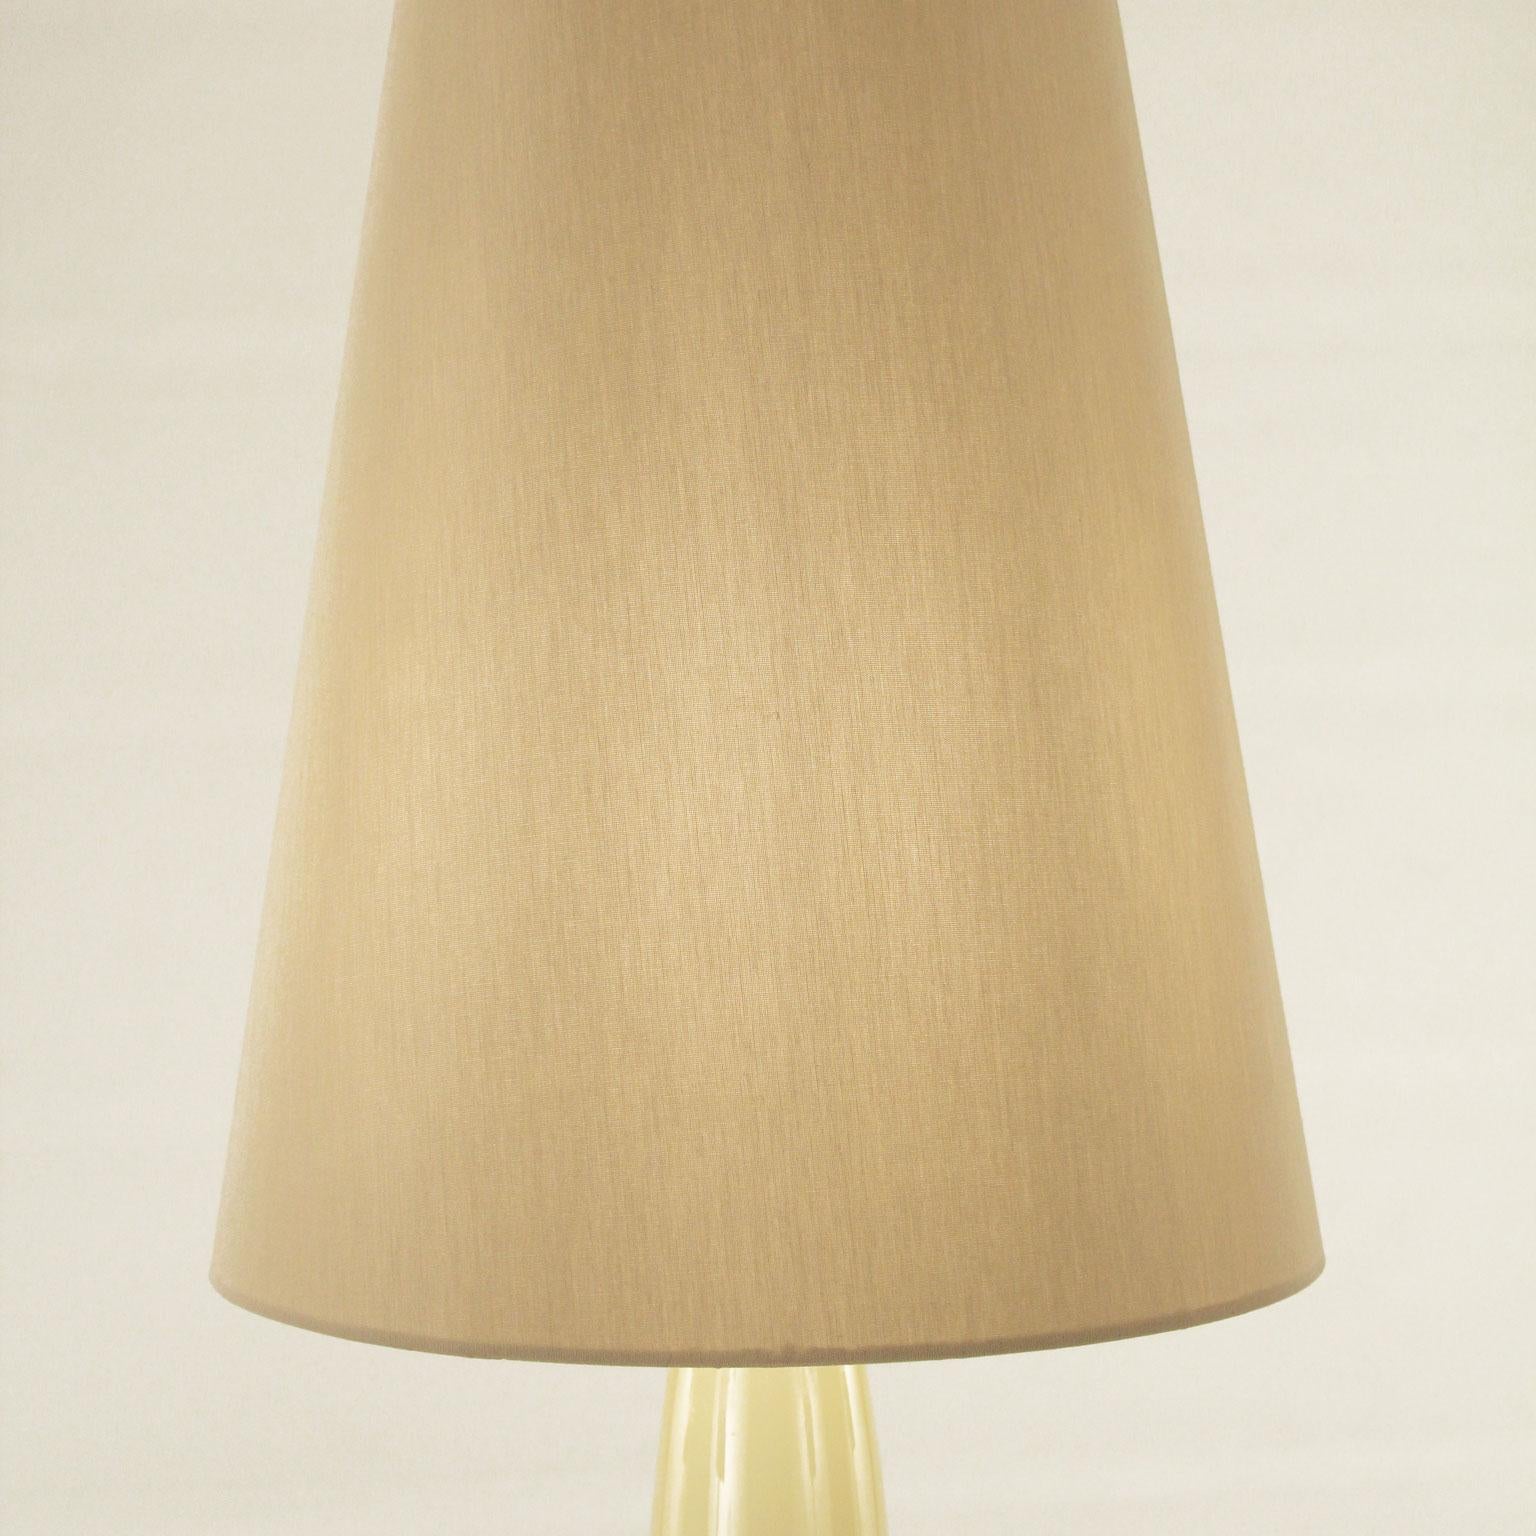 21st Century Table Lamp Amber Encased Murano Glass Lampshade by Multiforme In New Condition For Sale In Trebaseleghe, IT